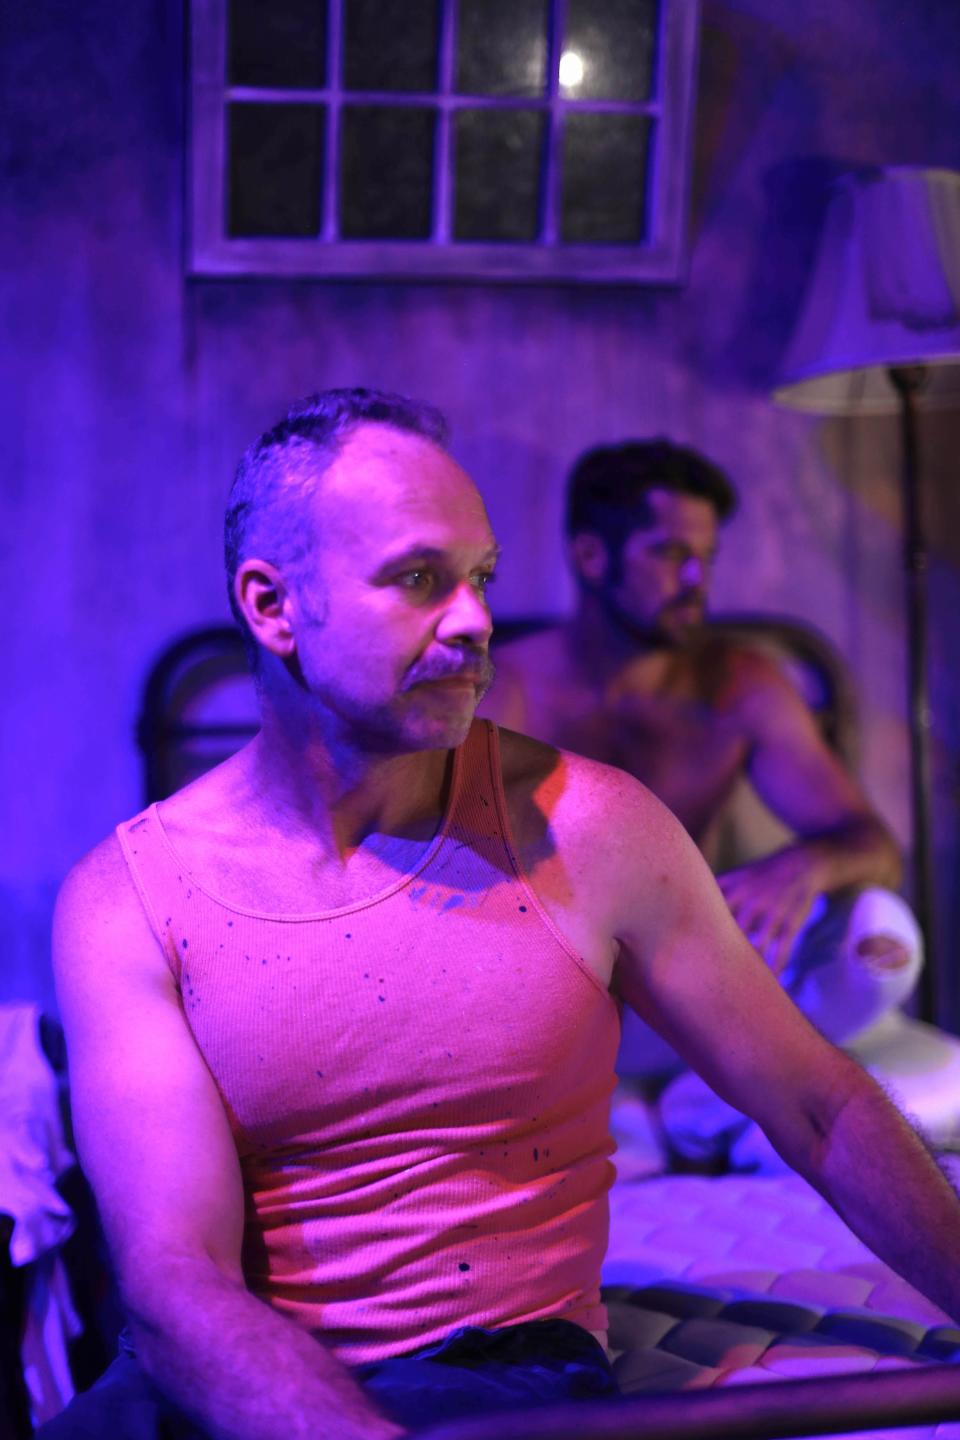 Joe MacDougall and Stephen Walker star in the New England premiere of "Jerker" at the Provincetown Theater.